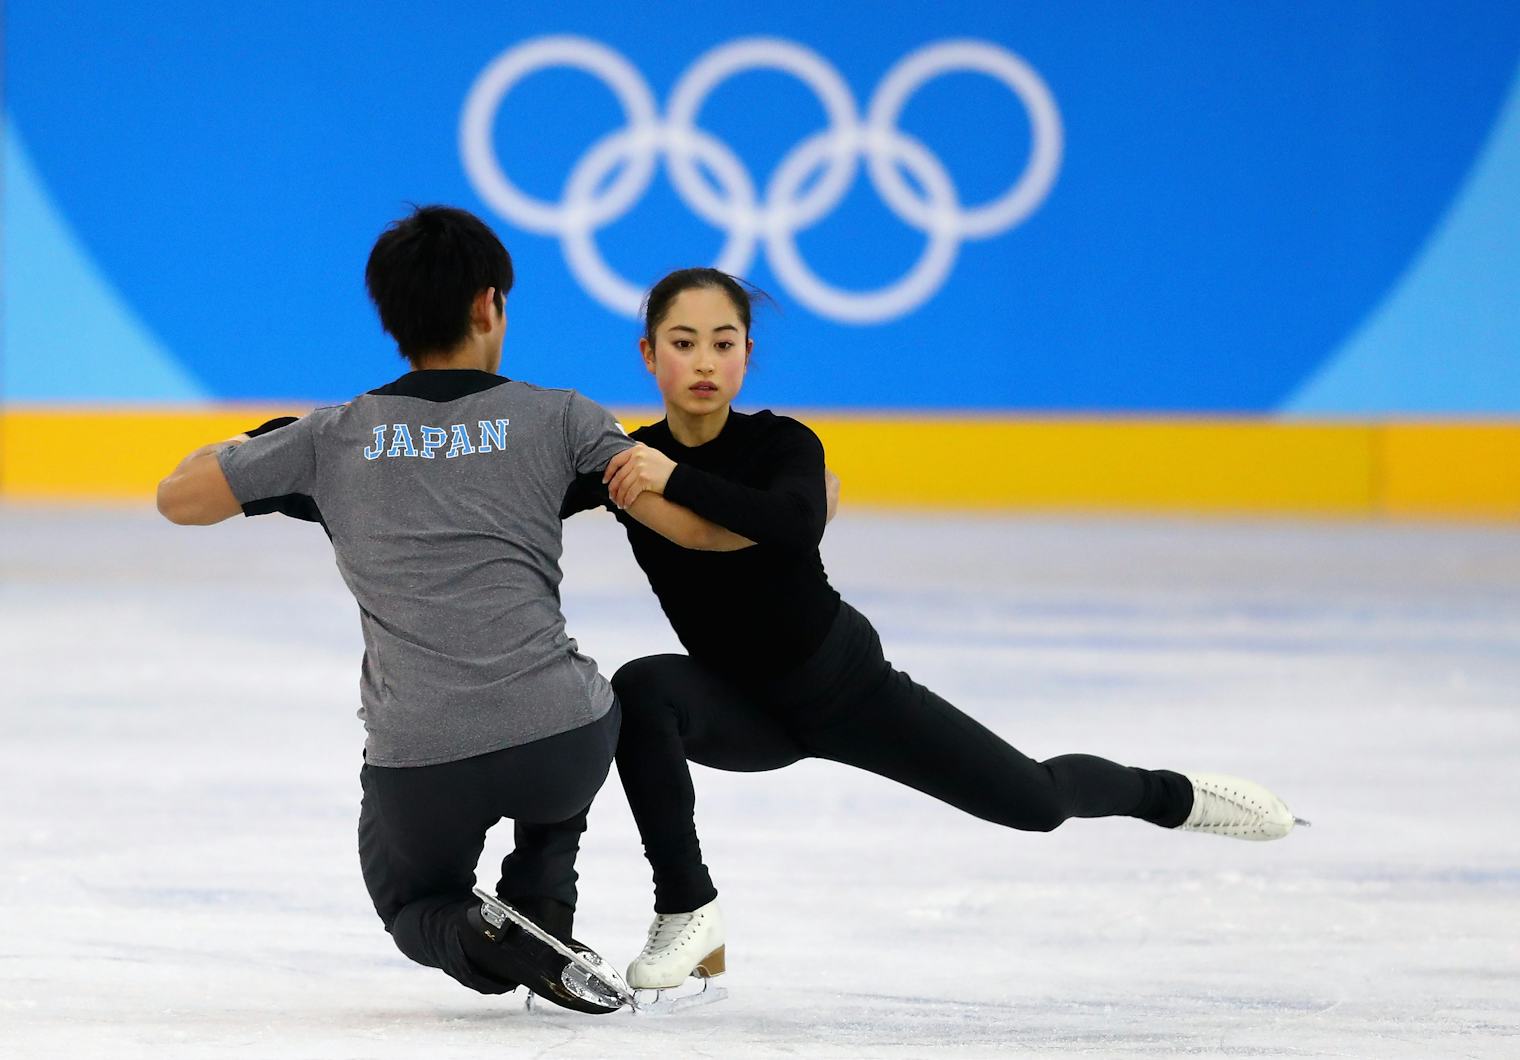 How Do Figure Skating Judges Score Performances? At The Winter Olympics